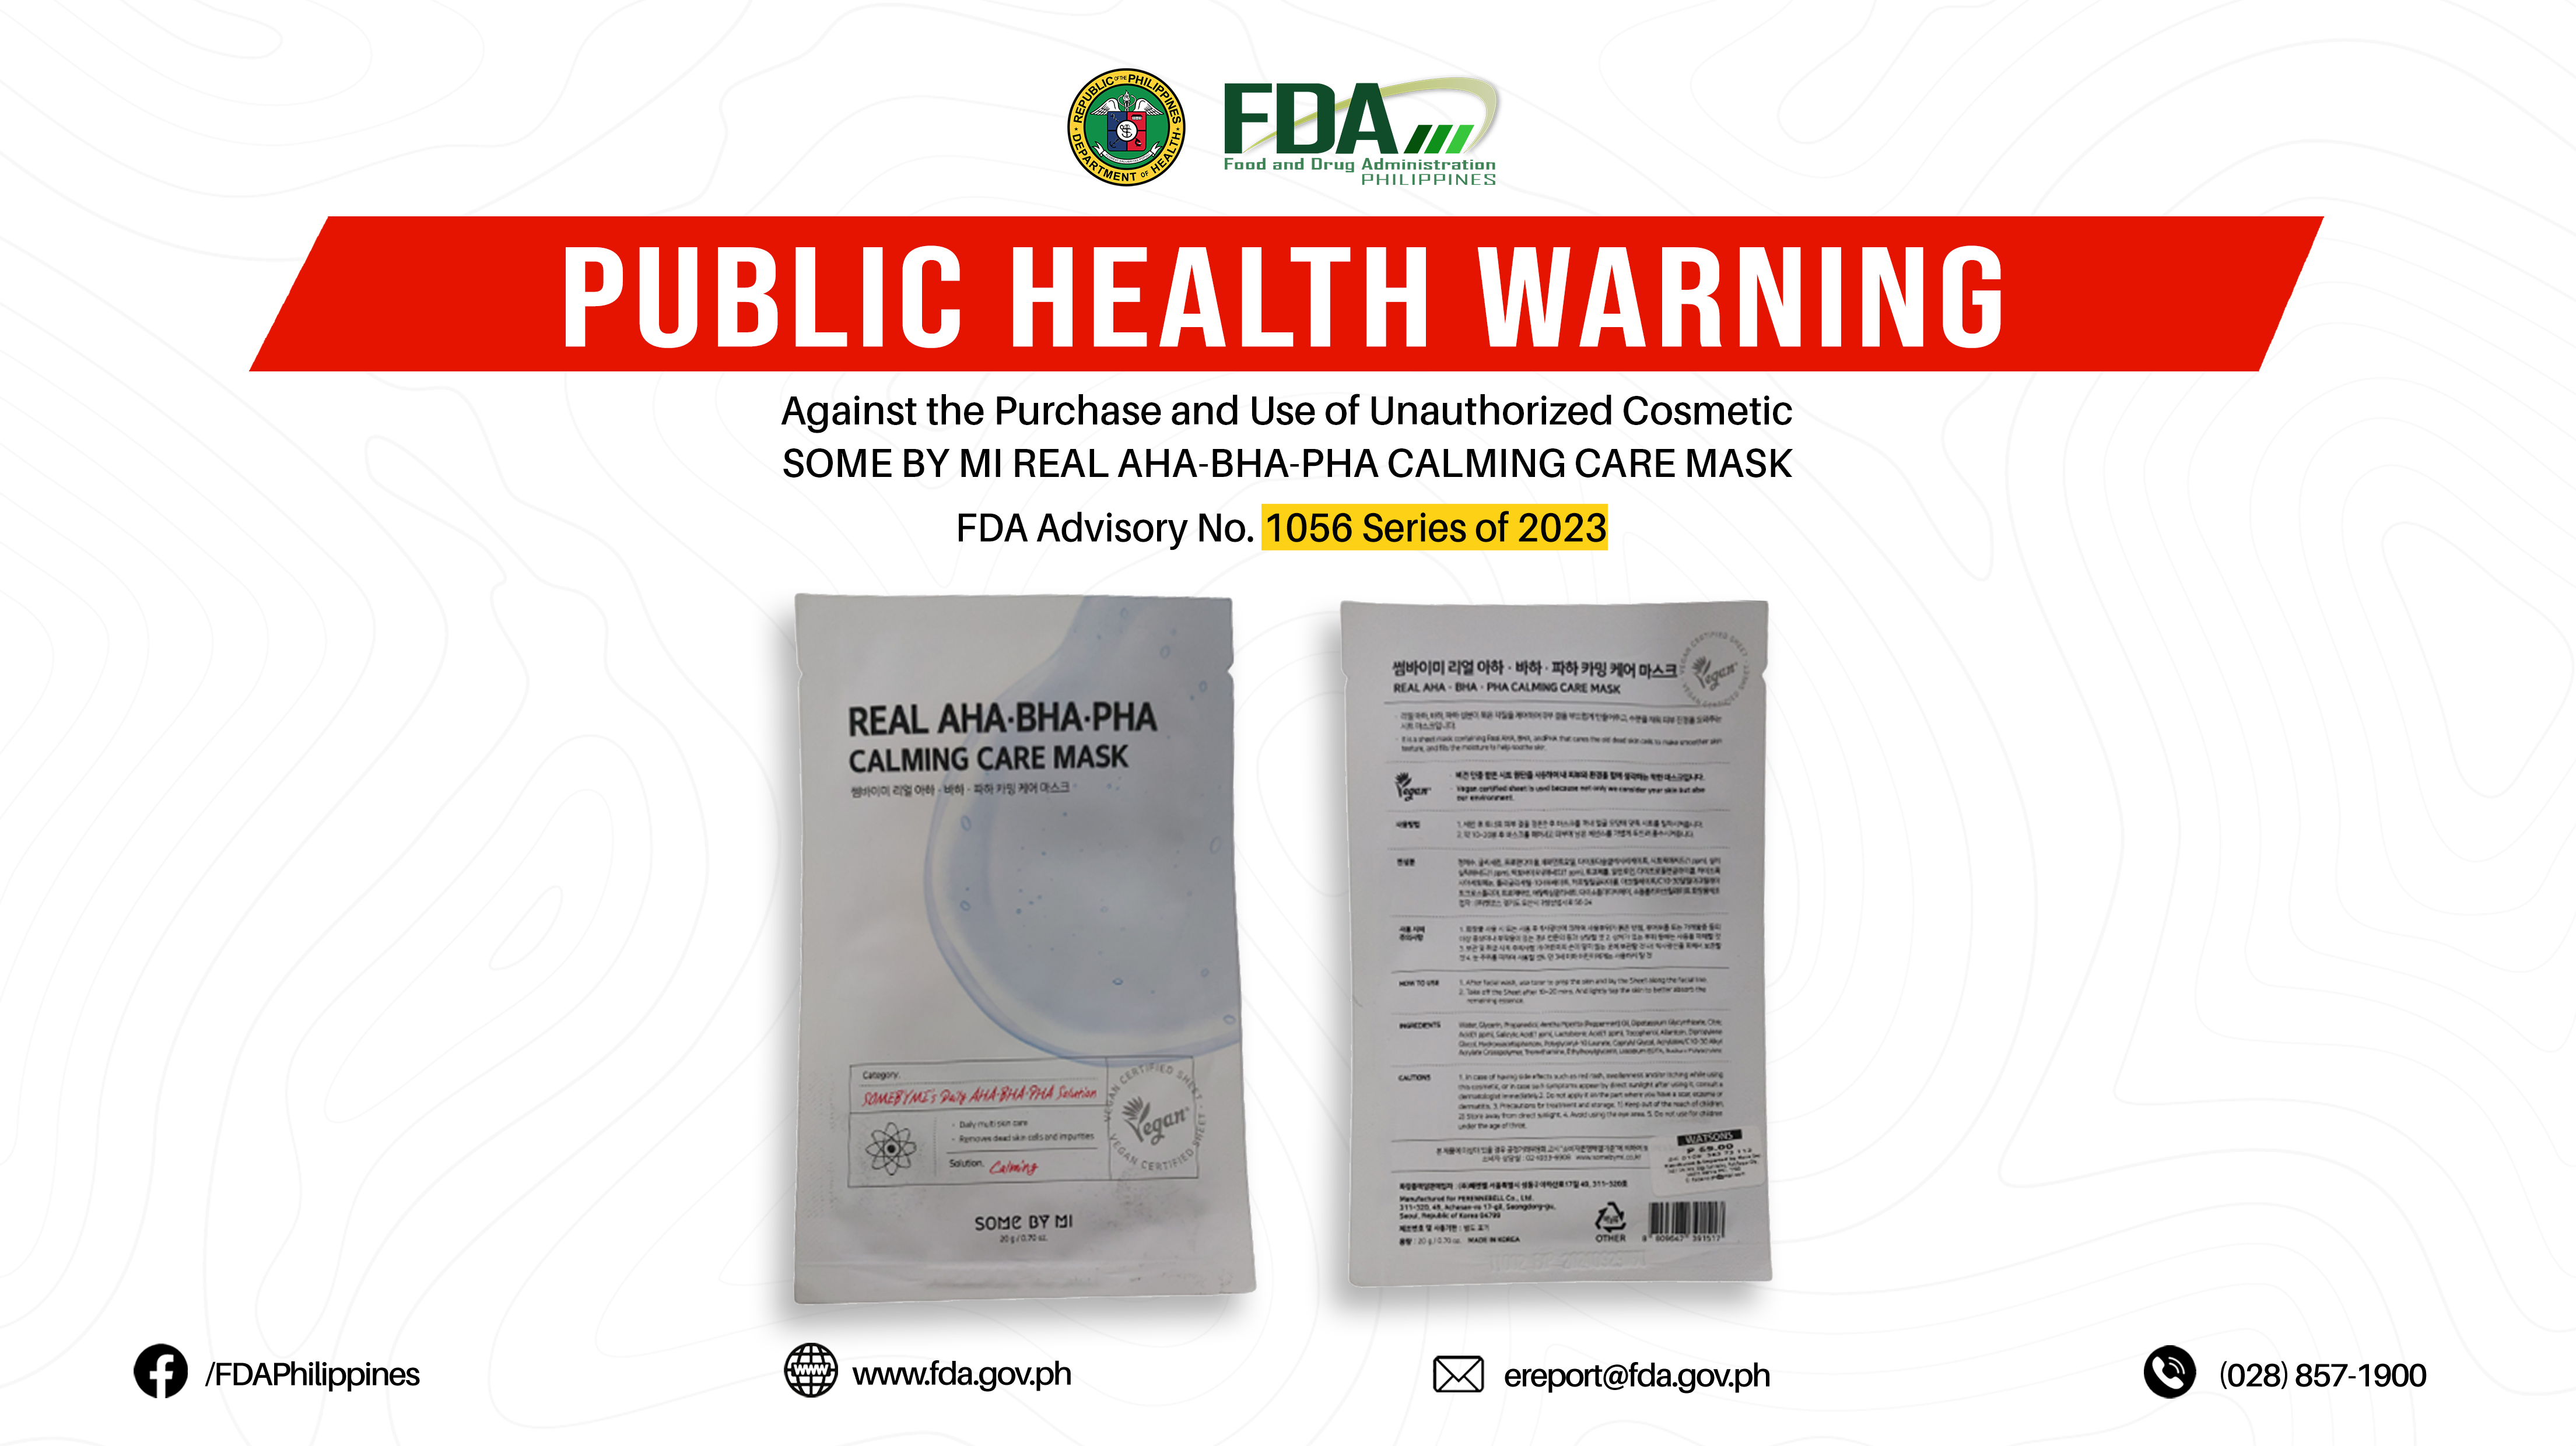 FDA Advisory No.2023-1056 || Public Health Warning Against the Purchase and Use of Unauthorized Cosmetic SOME BY MI REAL AHA-BHA-PHA CALMING CARE MASK